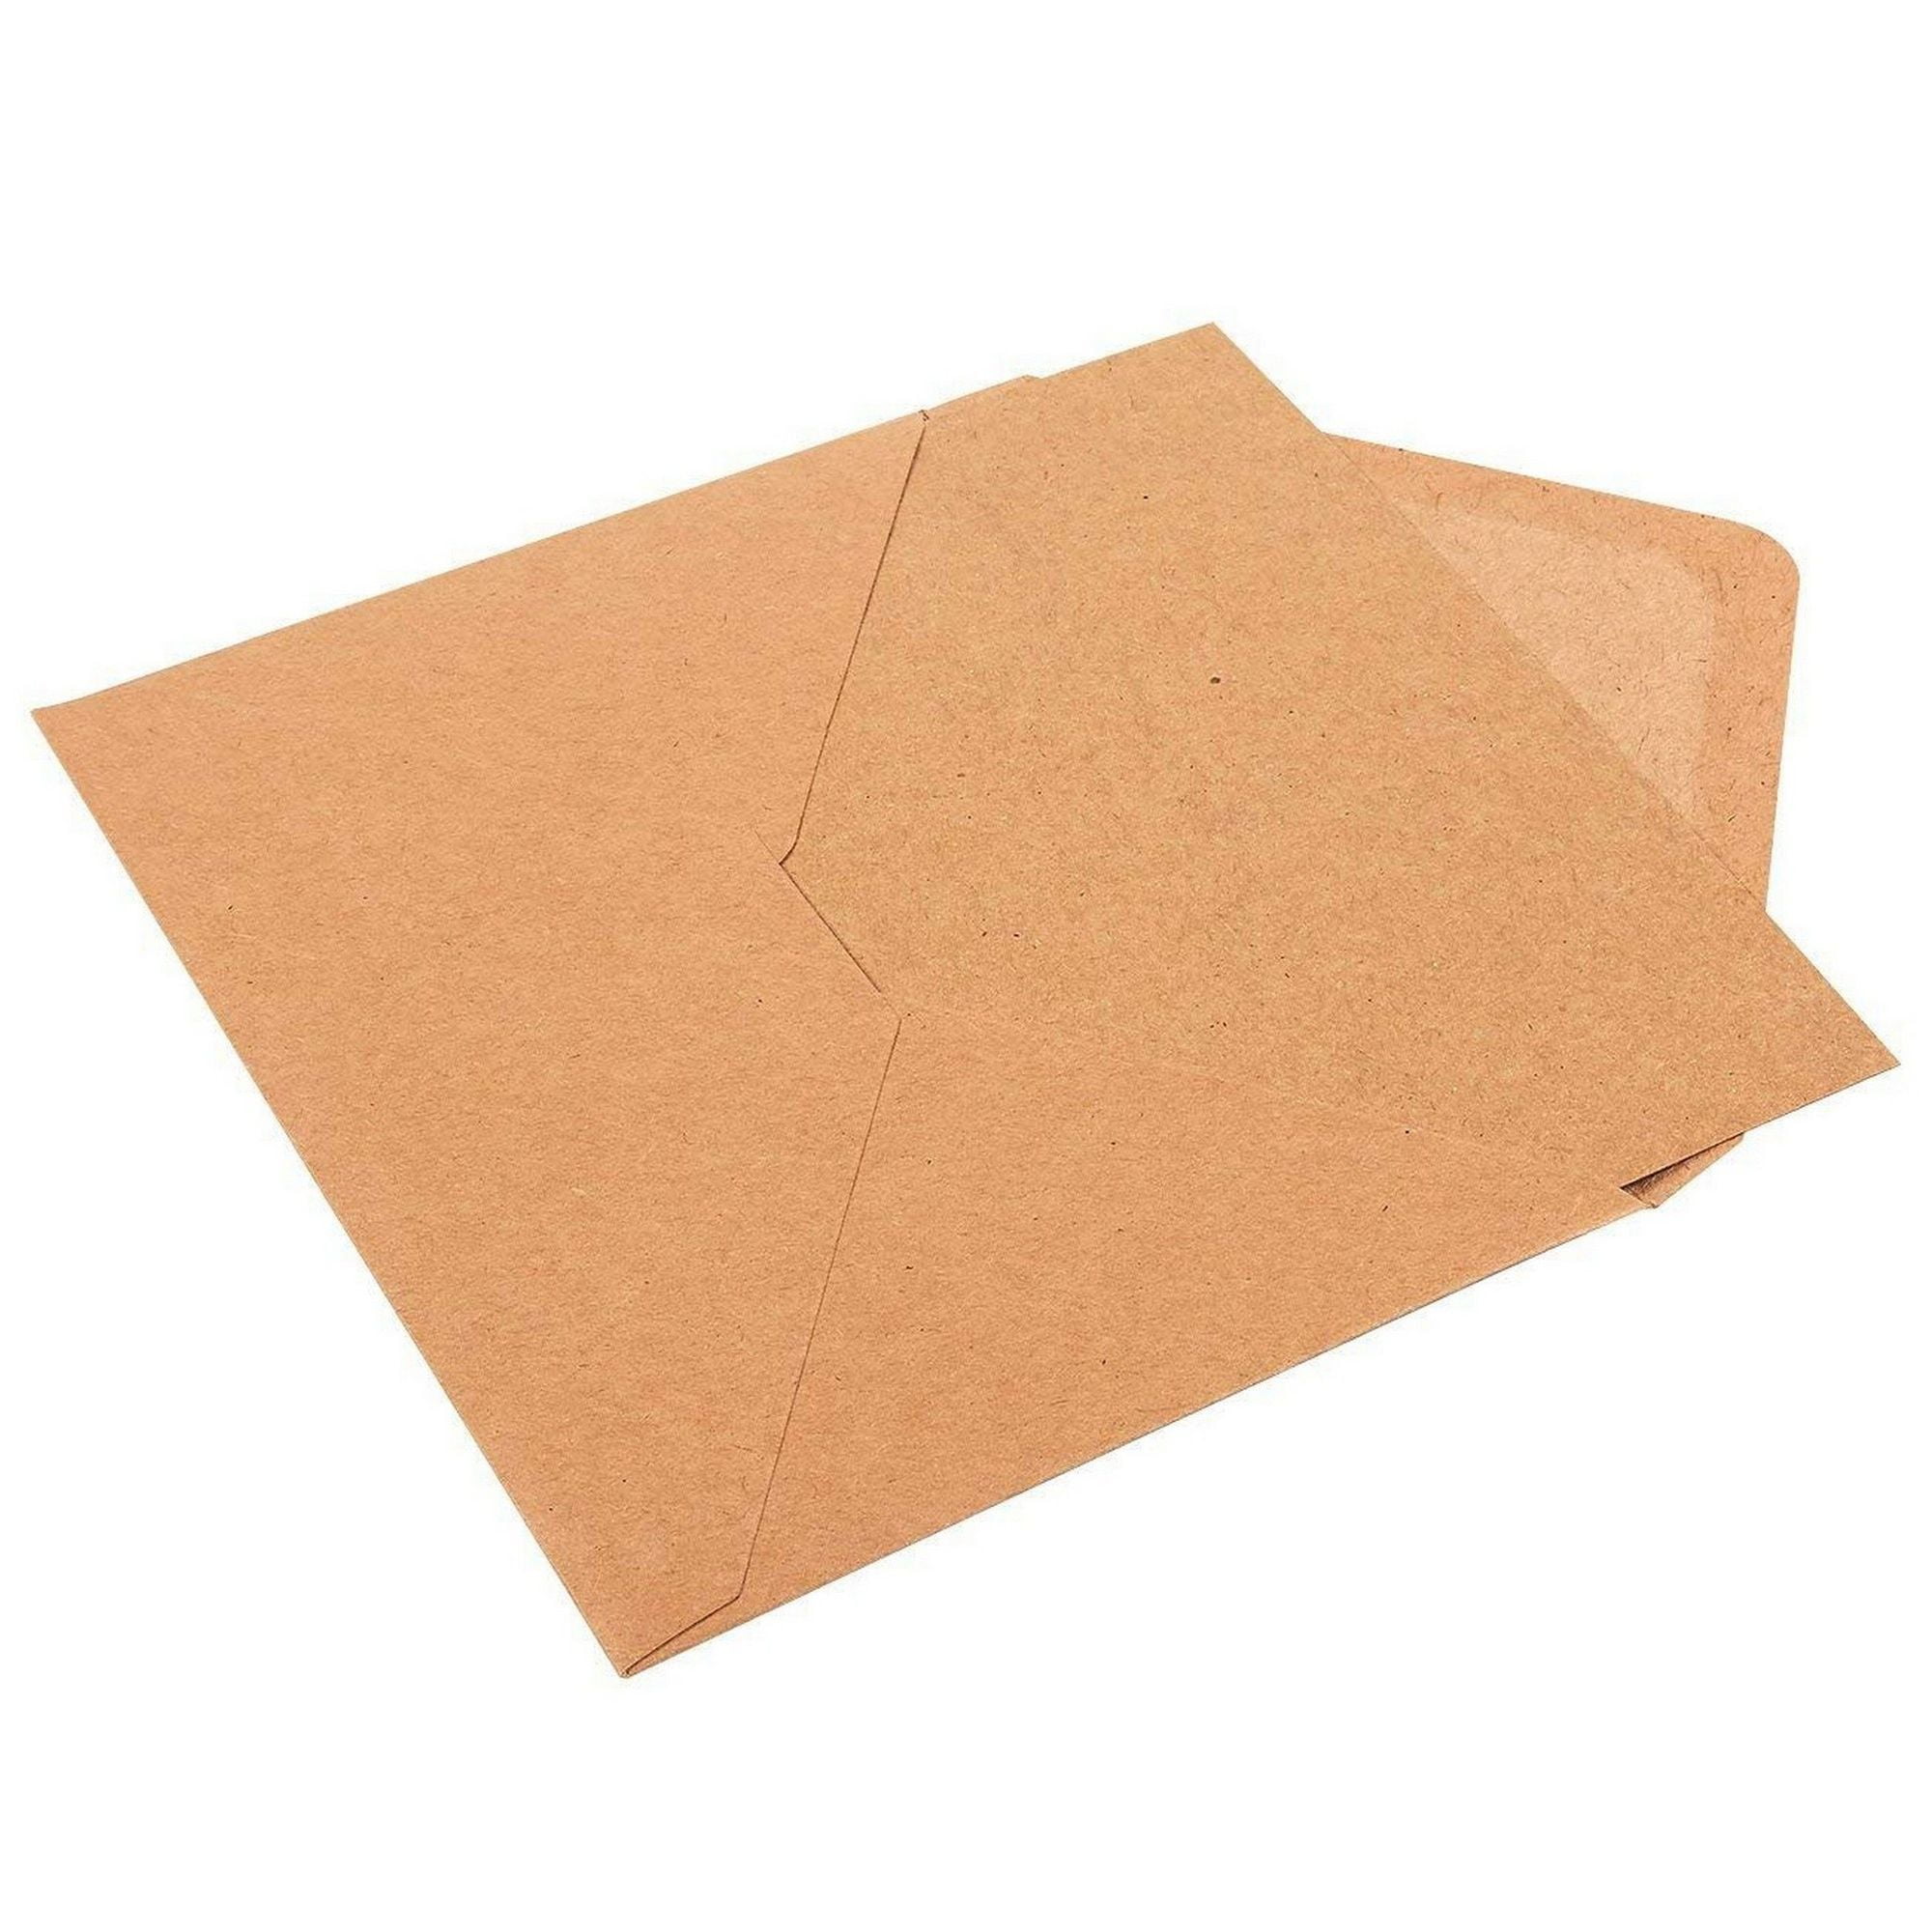 A7 Envelopes and Cards - 50-Count A7 Invitation Envelopes and 50-Count ...